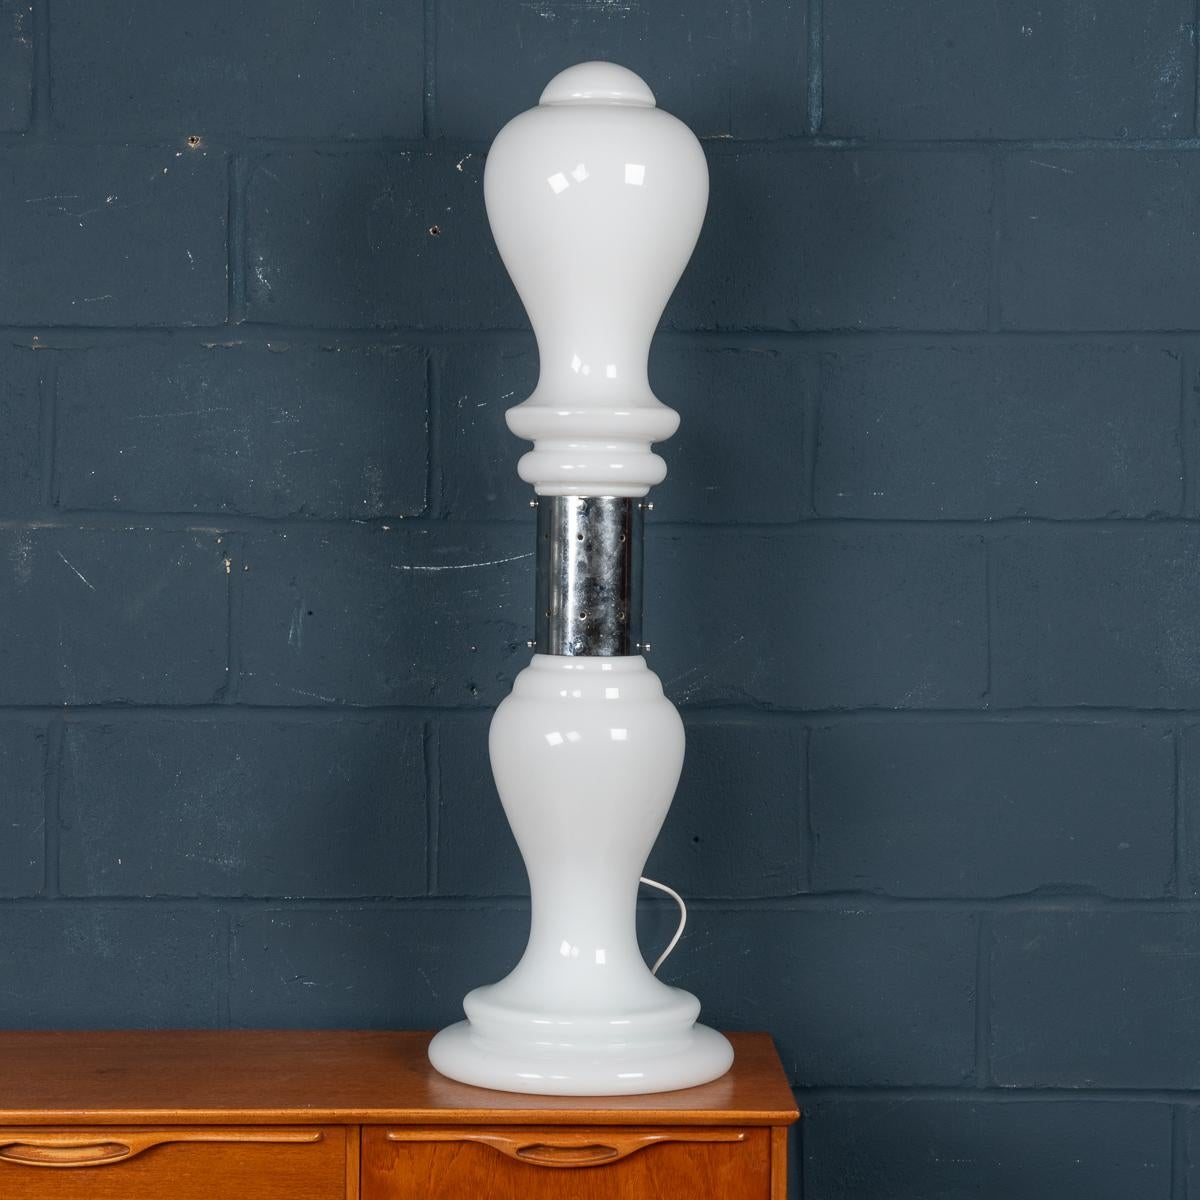 A wonderful vintage Italian floor lamp or large table lamp made by Carlo Nason for Mazzega. Produced in Murano, Venice in the 1980s, this glass lamp exemplifies Carlo Nason’s workmanship. Nason has used a lovely shaped white form for the glass base